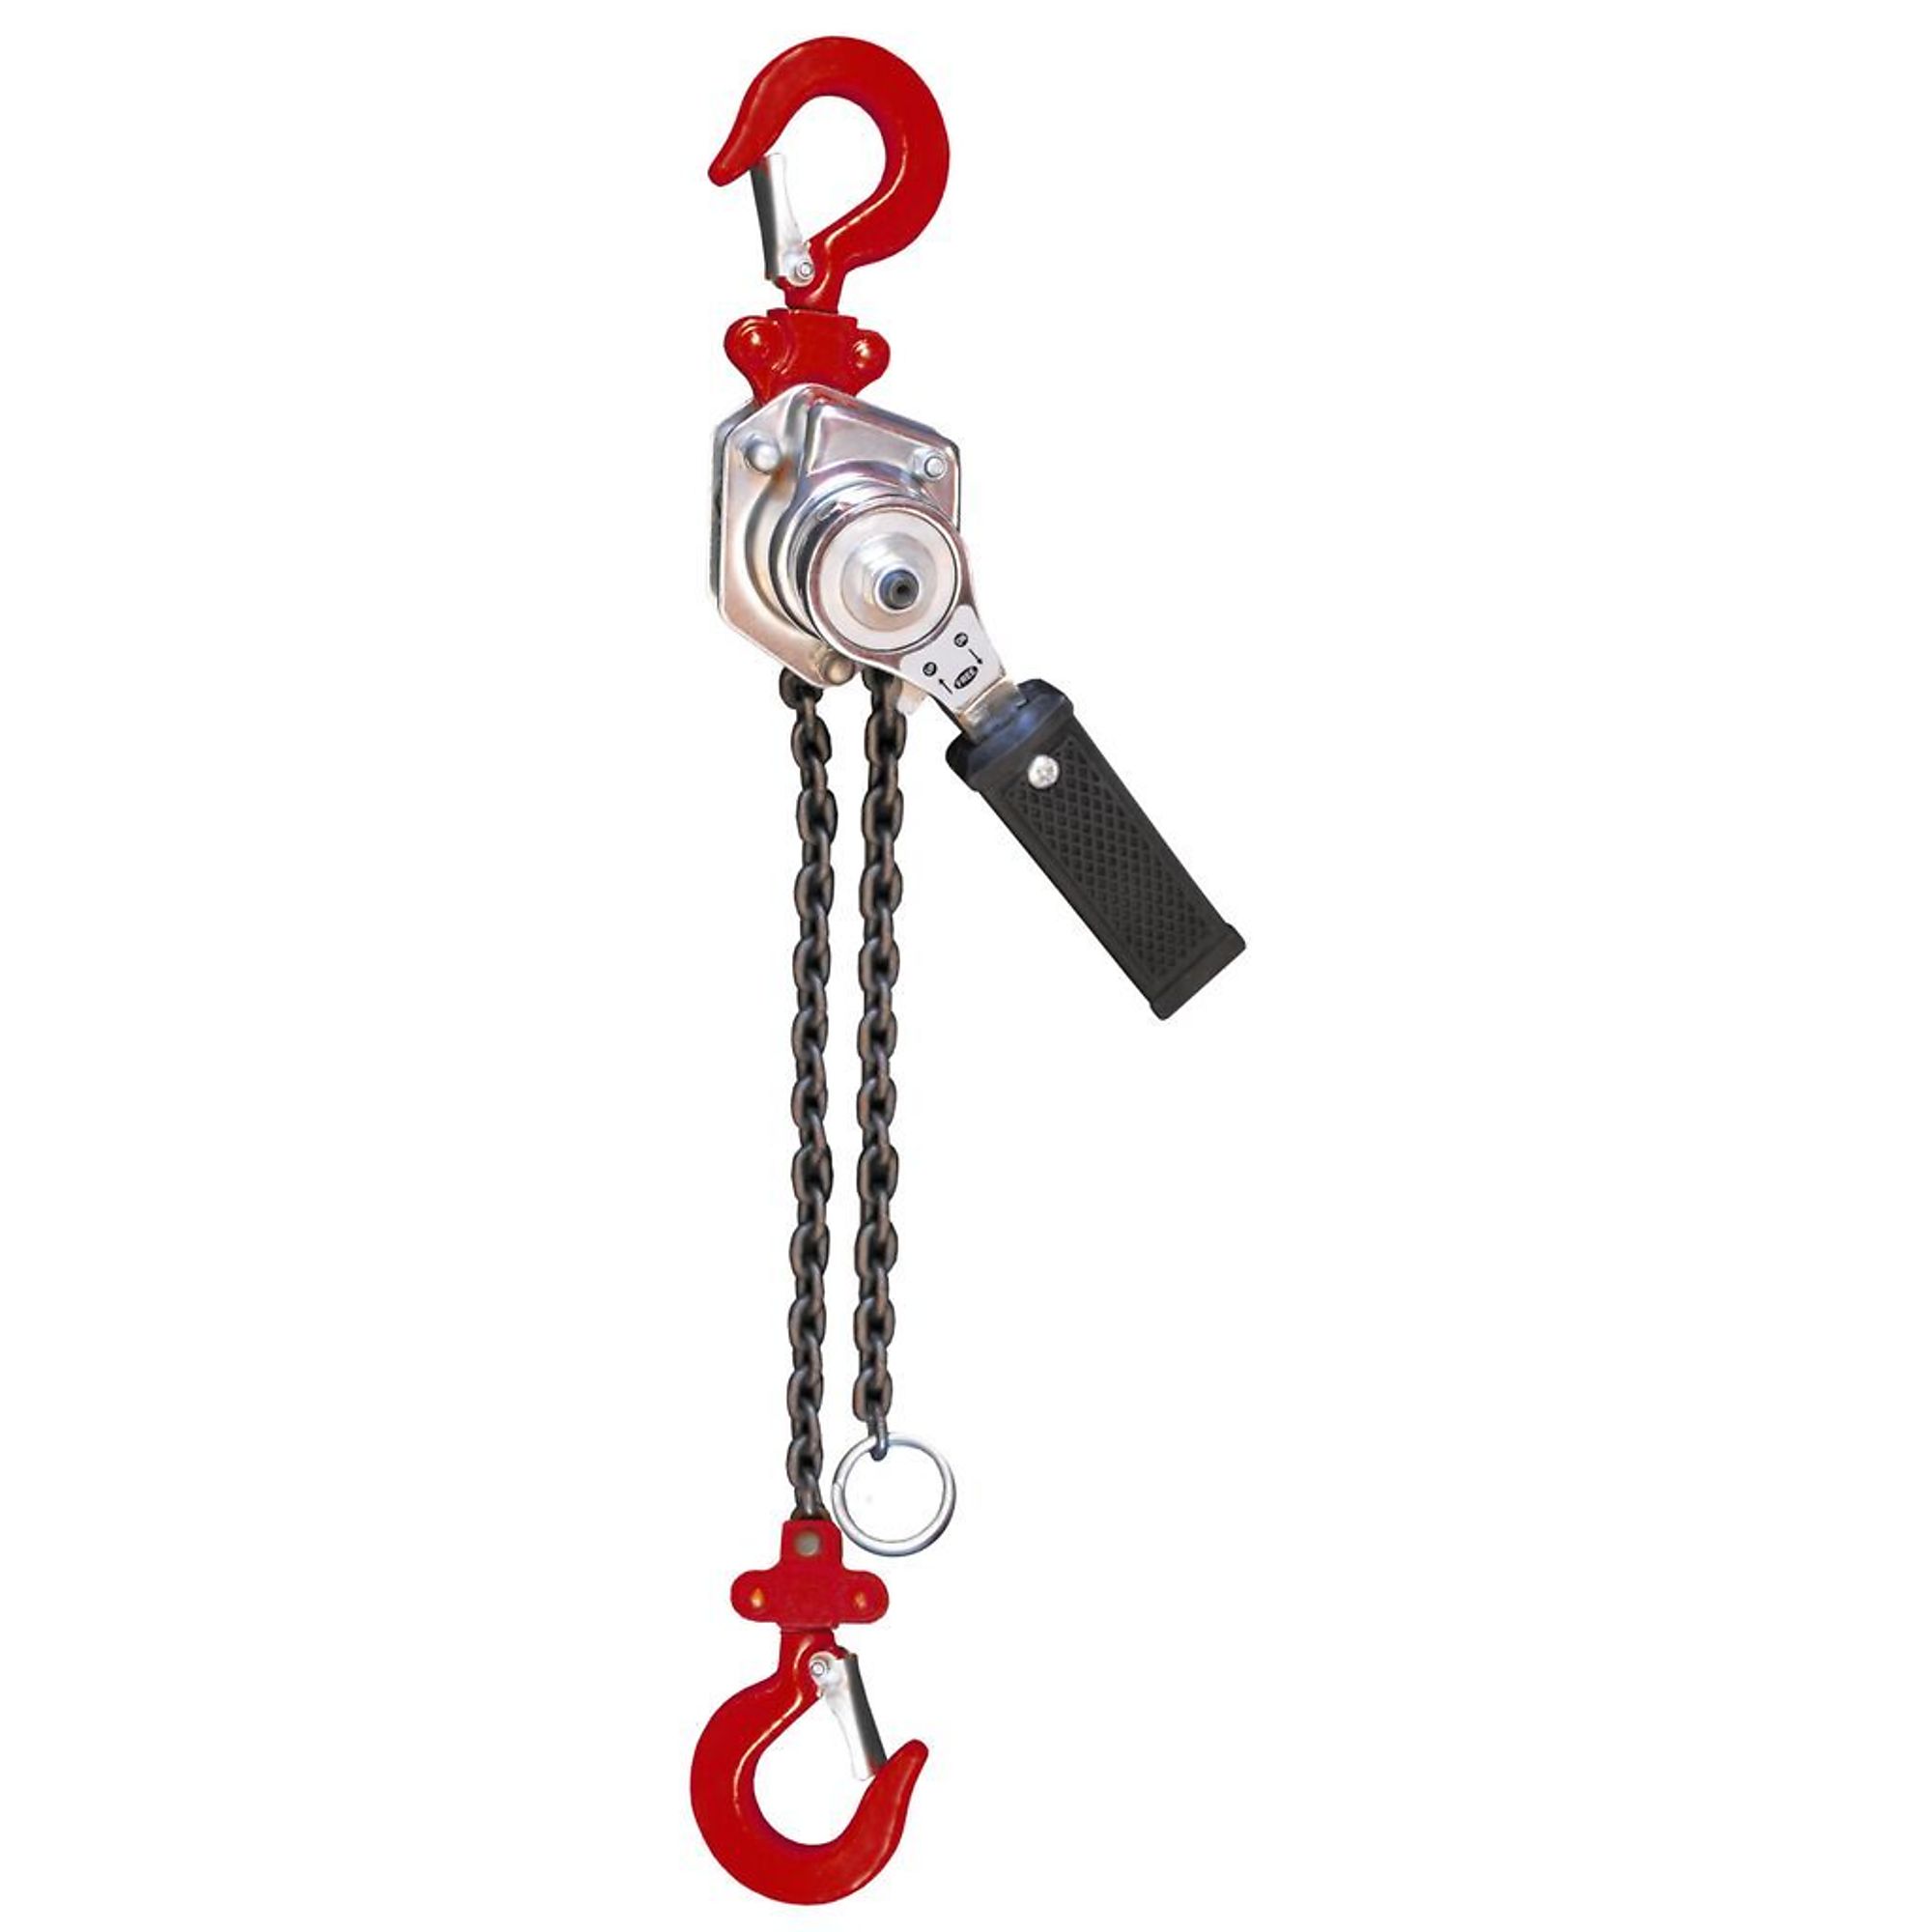 American Power Pull, .25 ton chain puller, Power Source Manual Lever, Capacity 500 lb, Lift Height 5 ft, Model 602